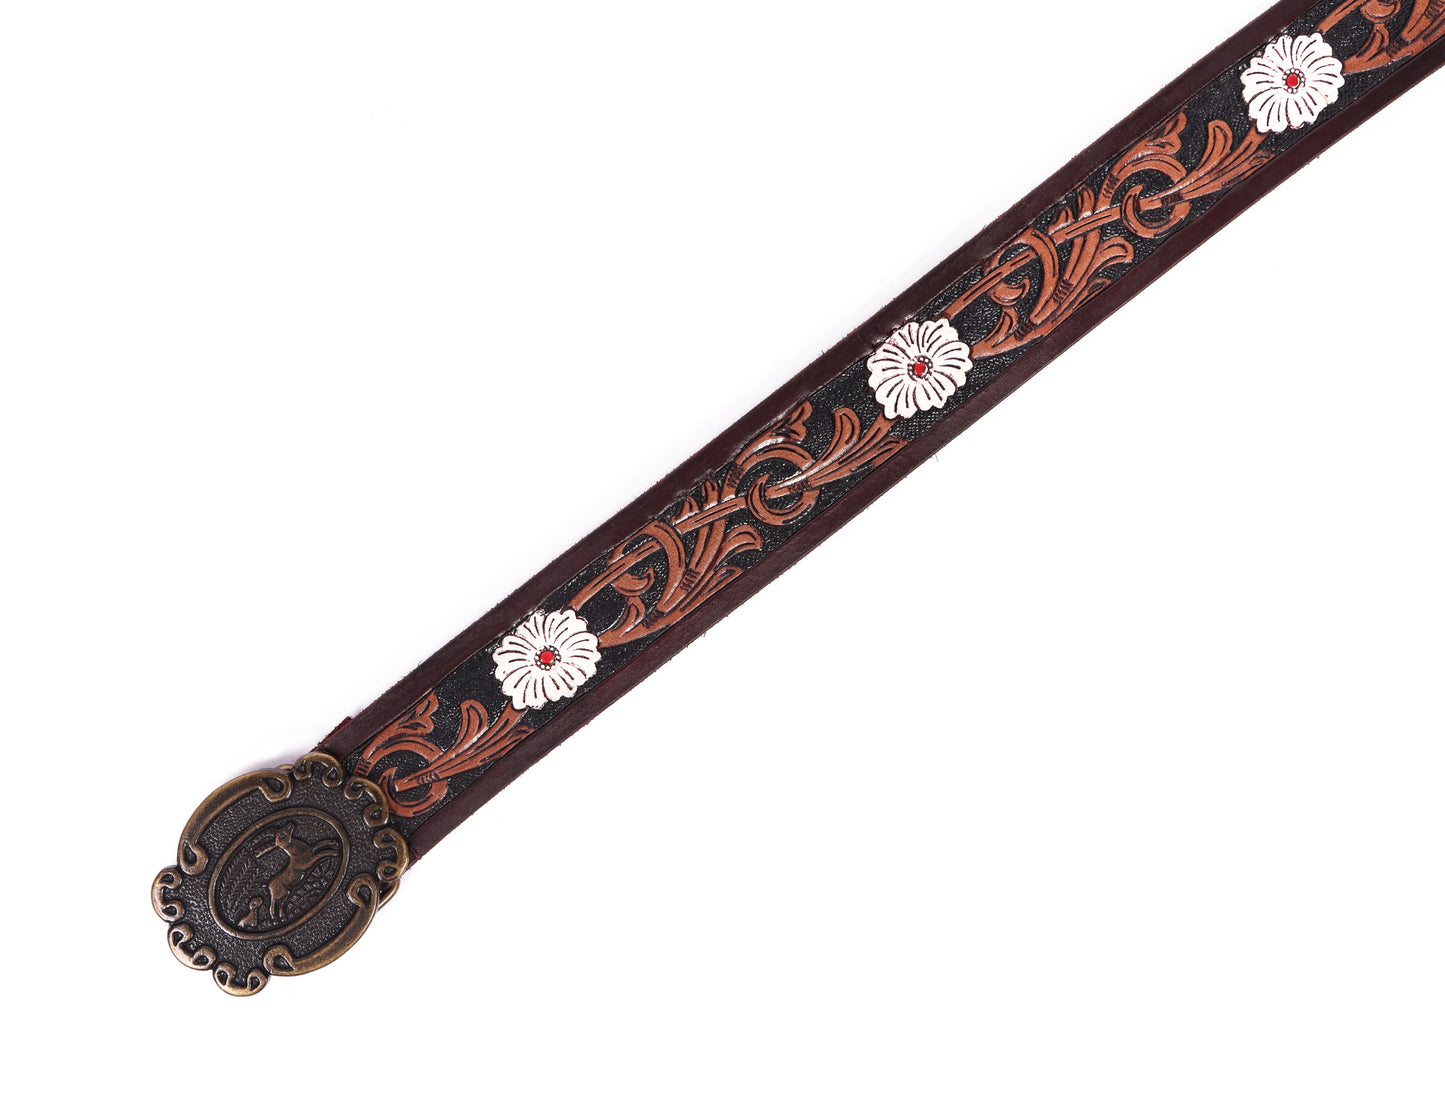 Artisan Brown Leather Tooling Belt: Animal-Inspired Buckle and Floral Accents. - CELTICINDIA